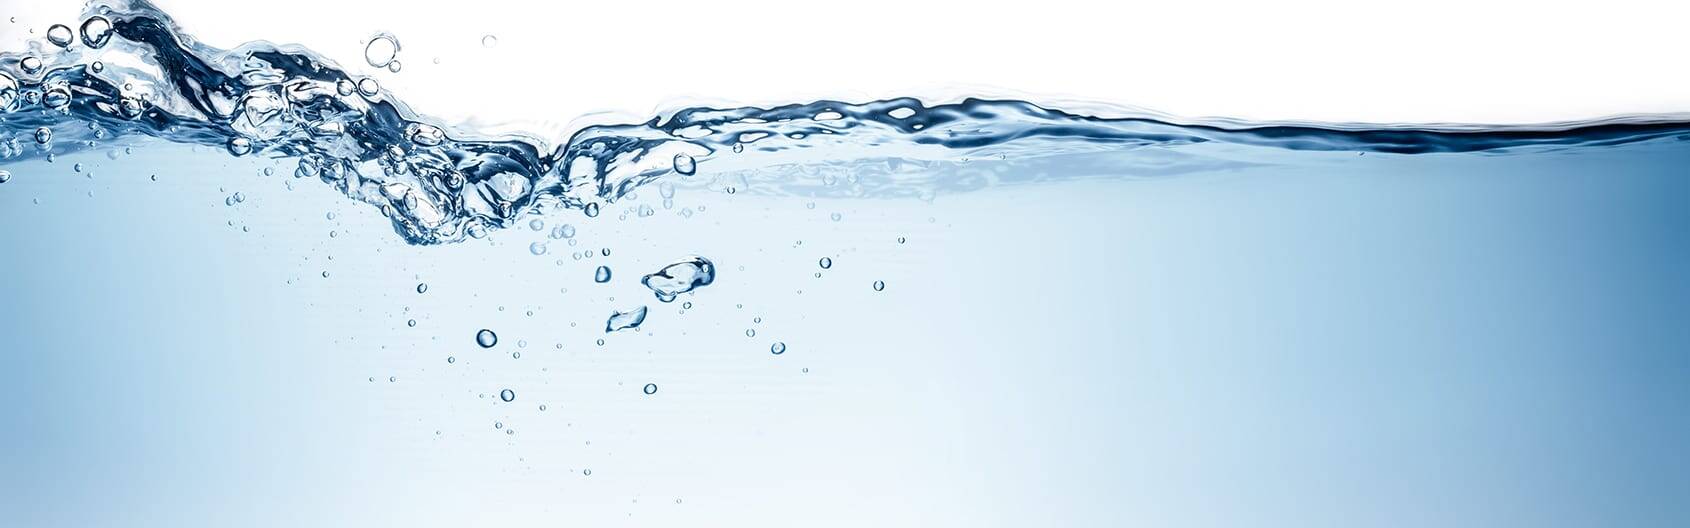 Leep Utilities completes purchase of SSE’s water business